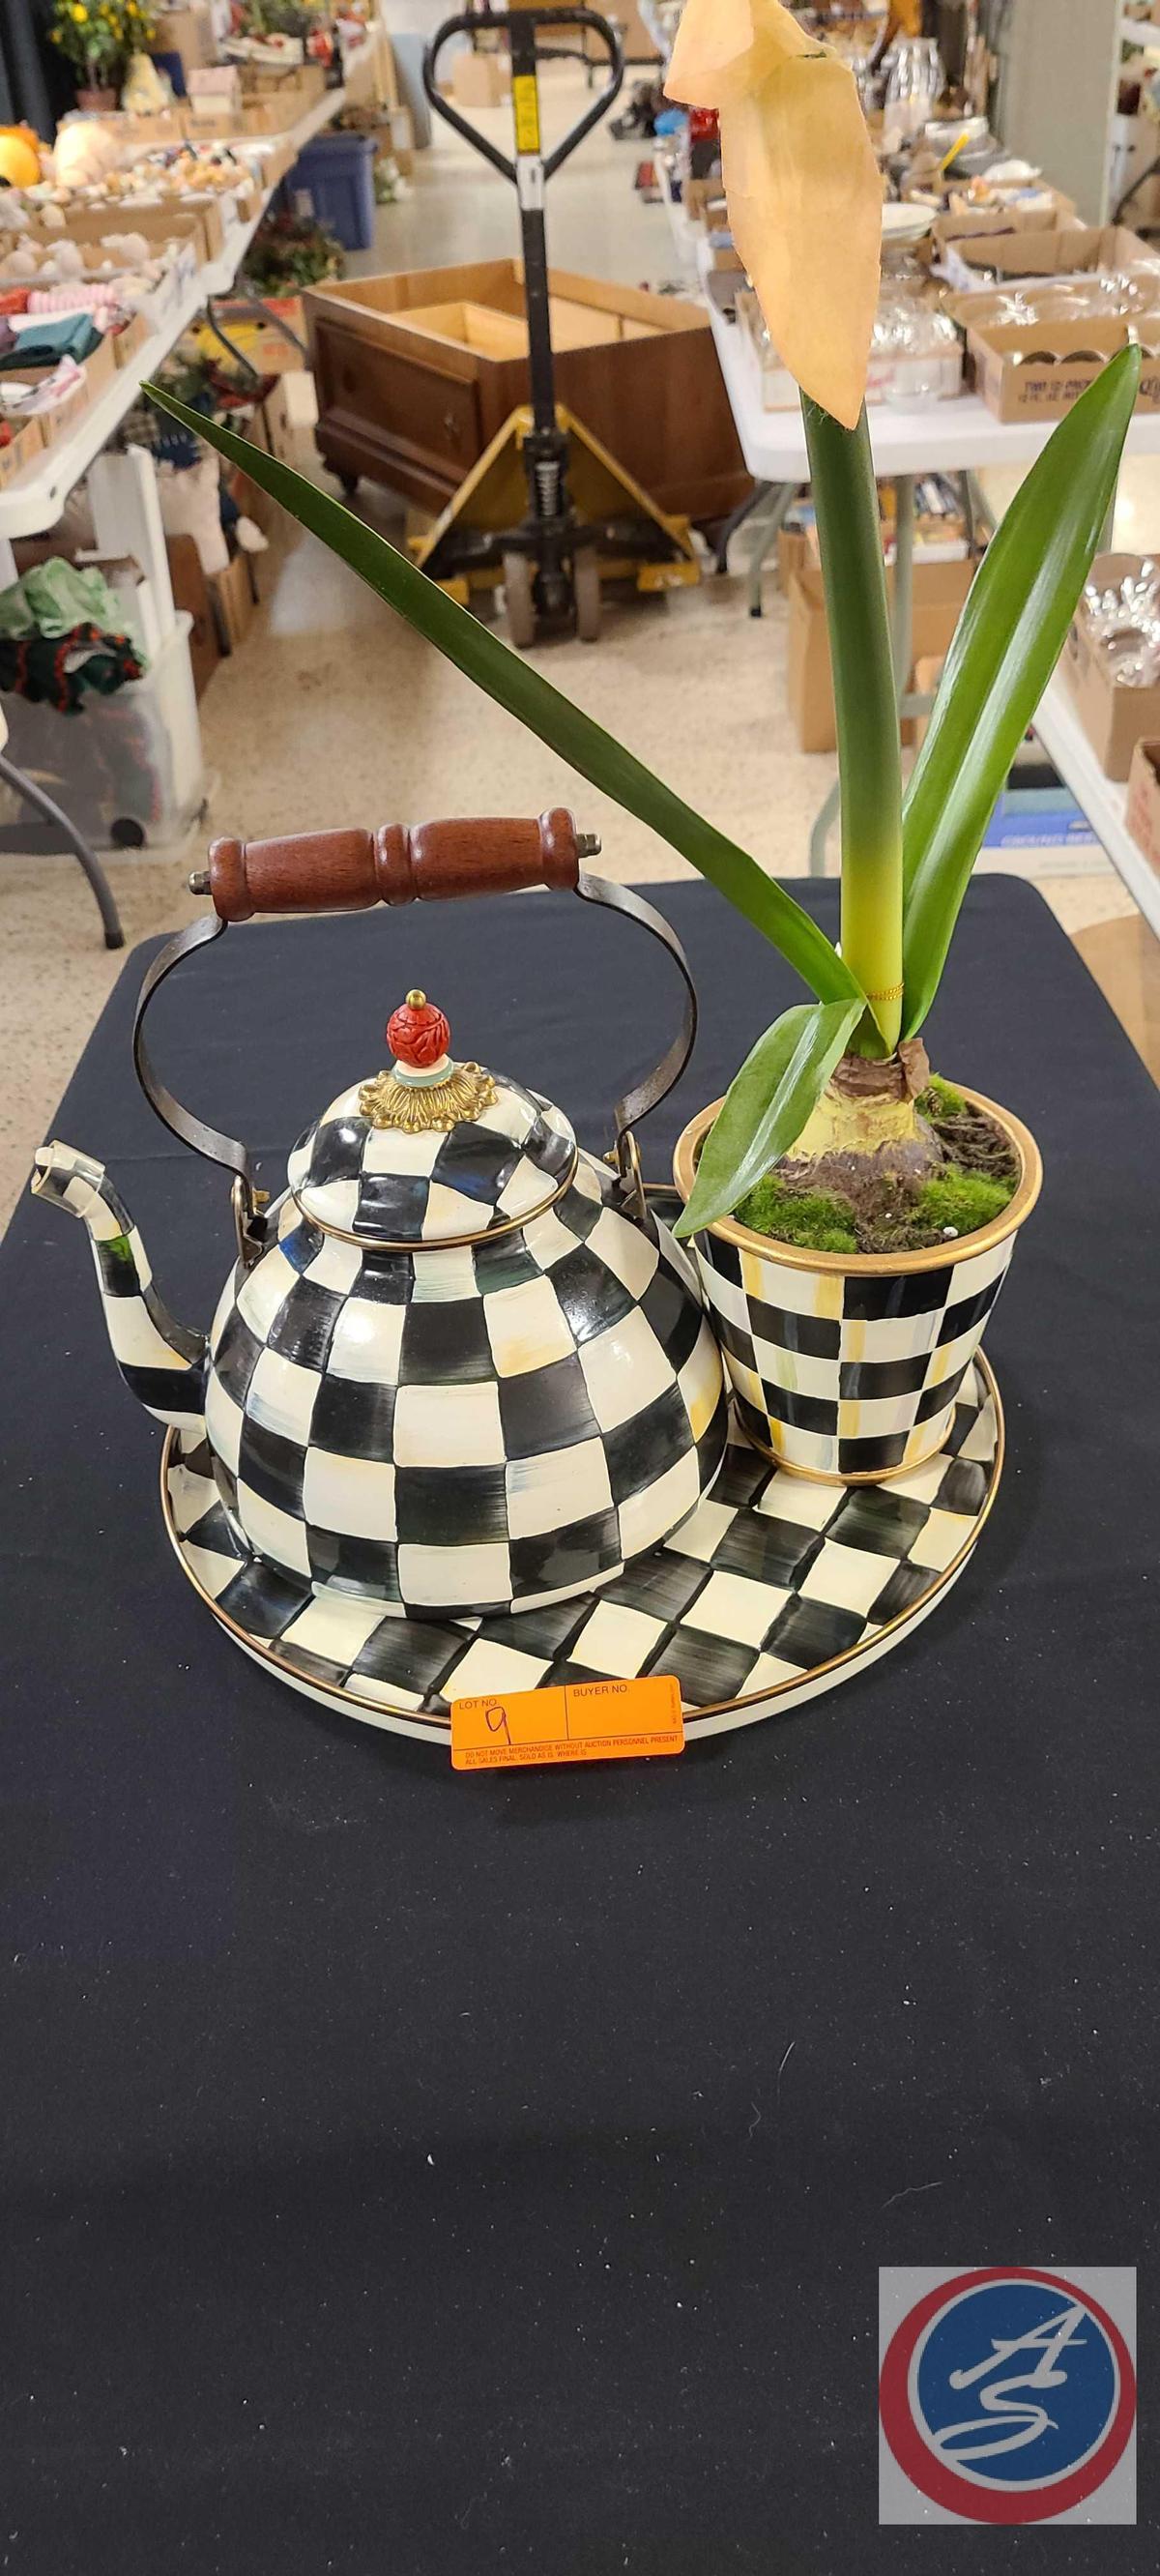 (1) MacKenzie-Childs Plate,...MacKenzie-Childs Courtly Check 3 Quart Tea Kettle, Planter with Flower